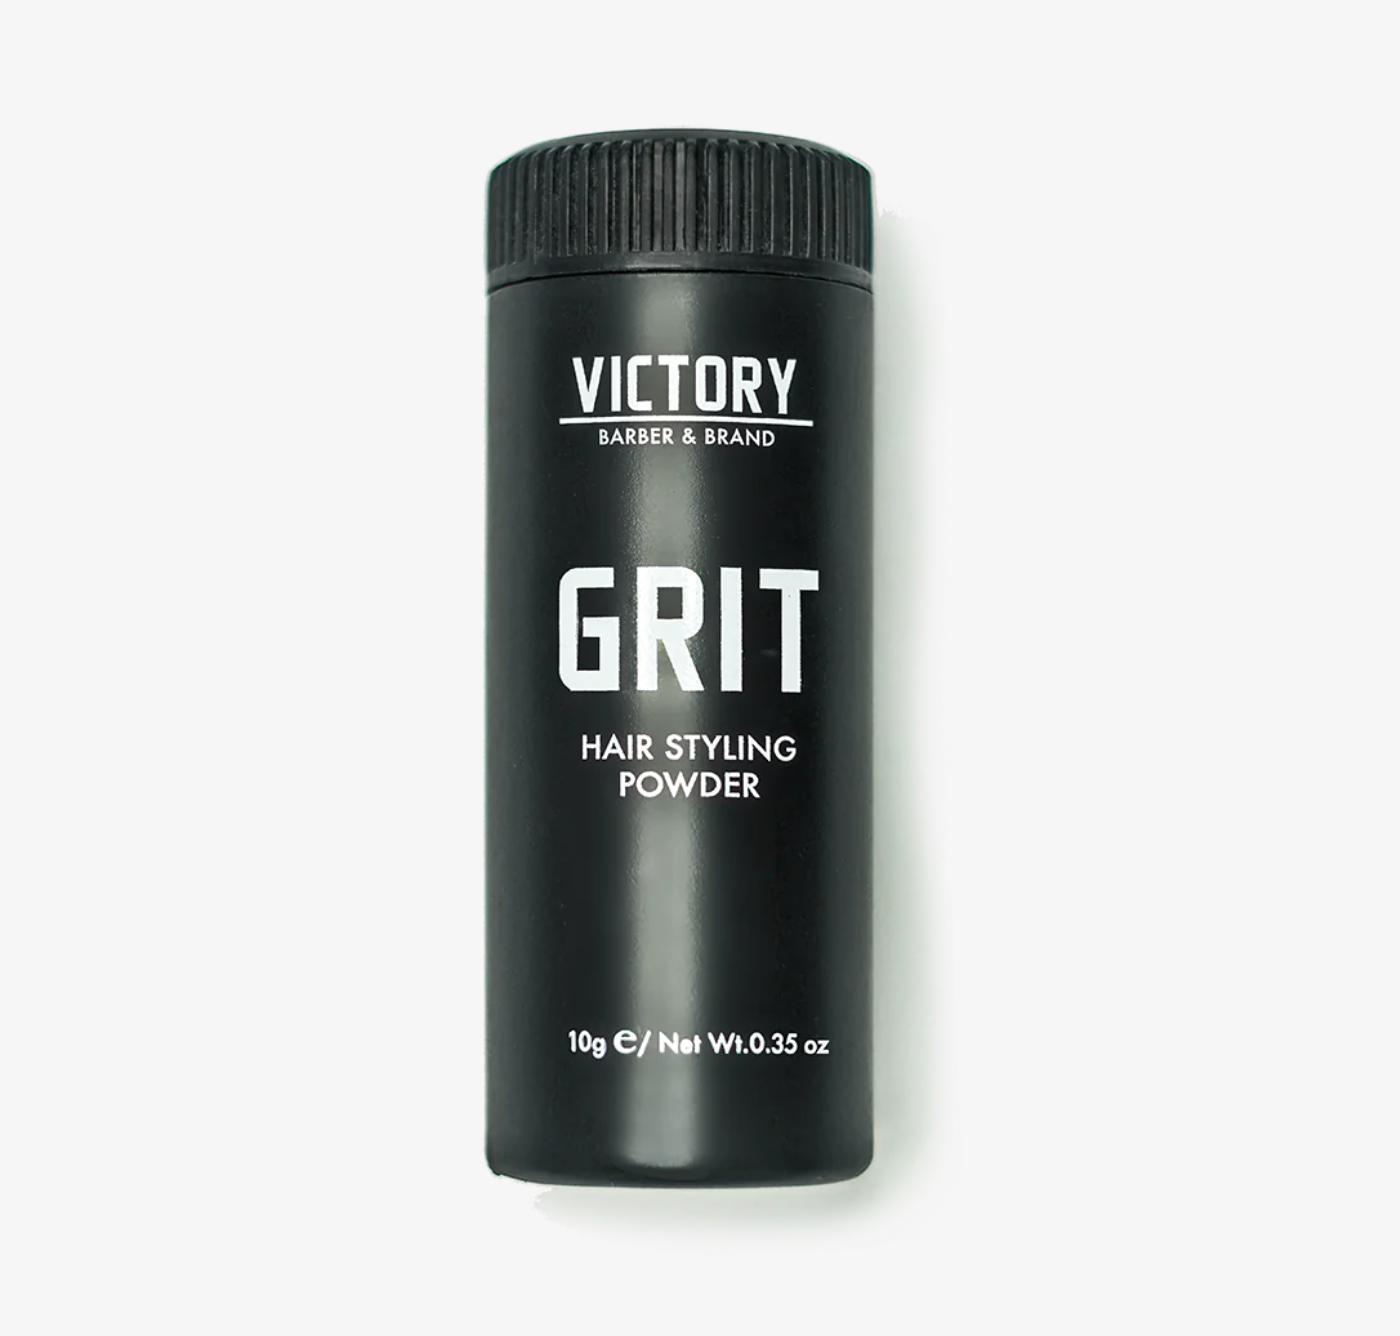 Victory Grit Hair Styling Powder